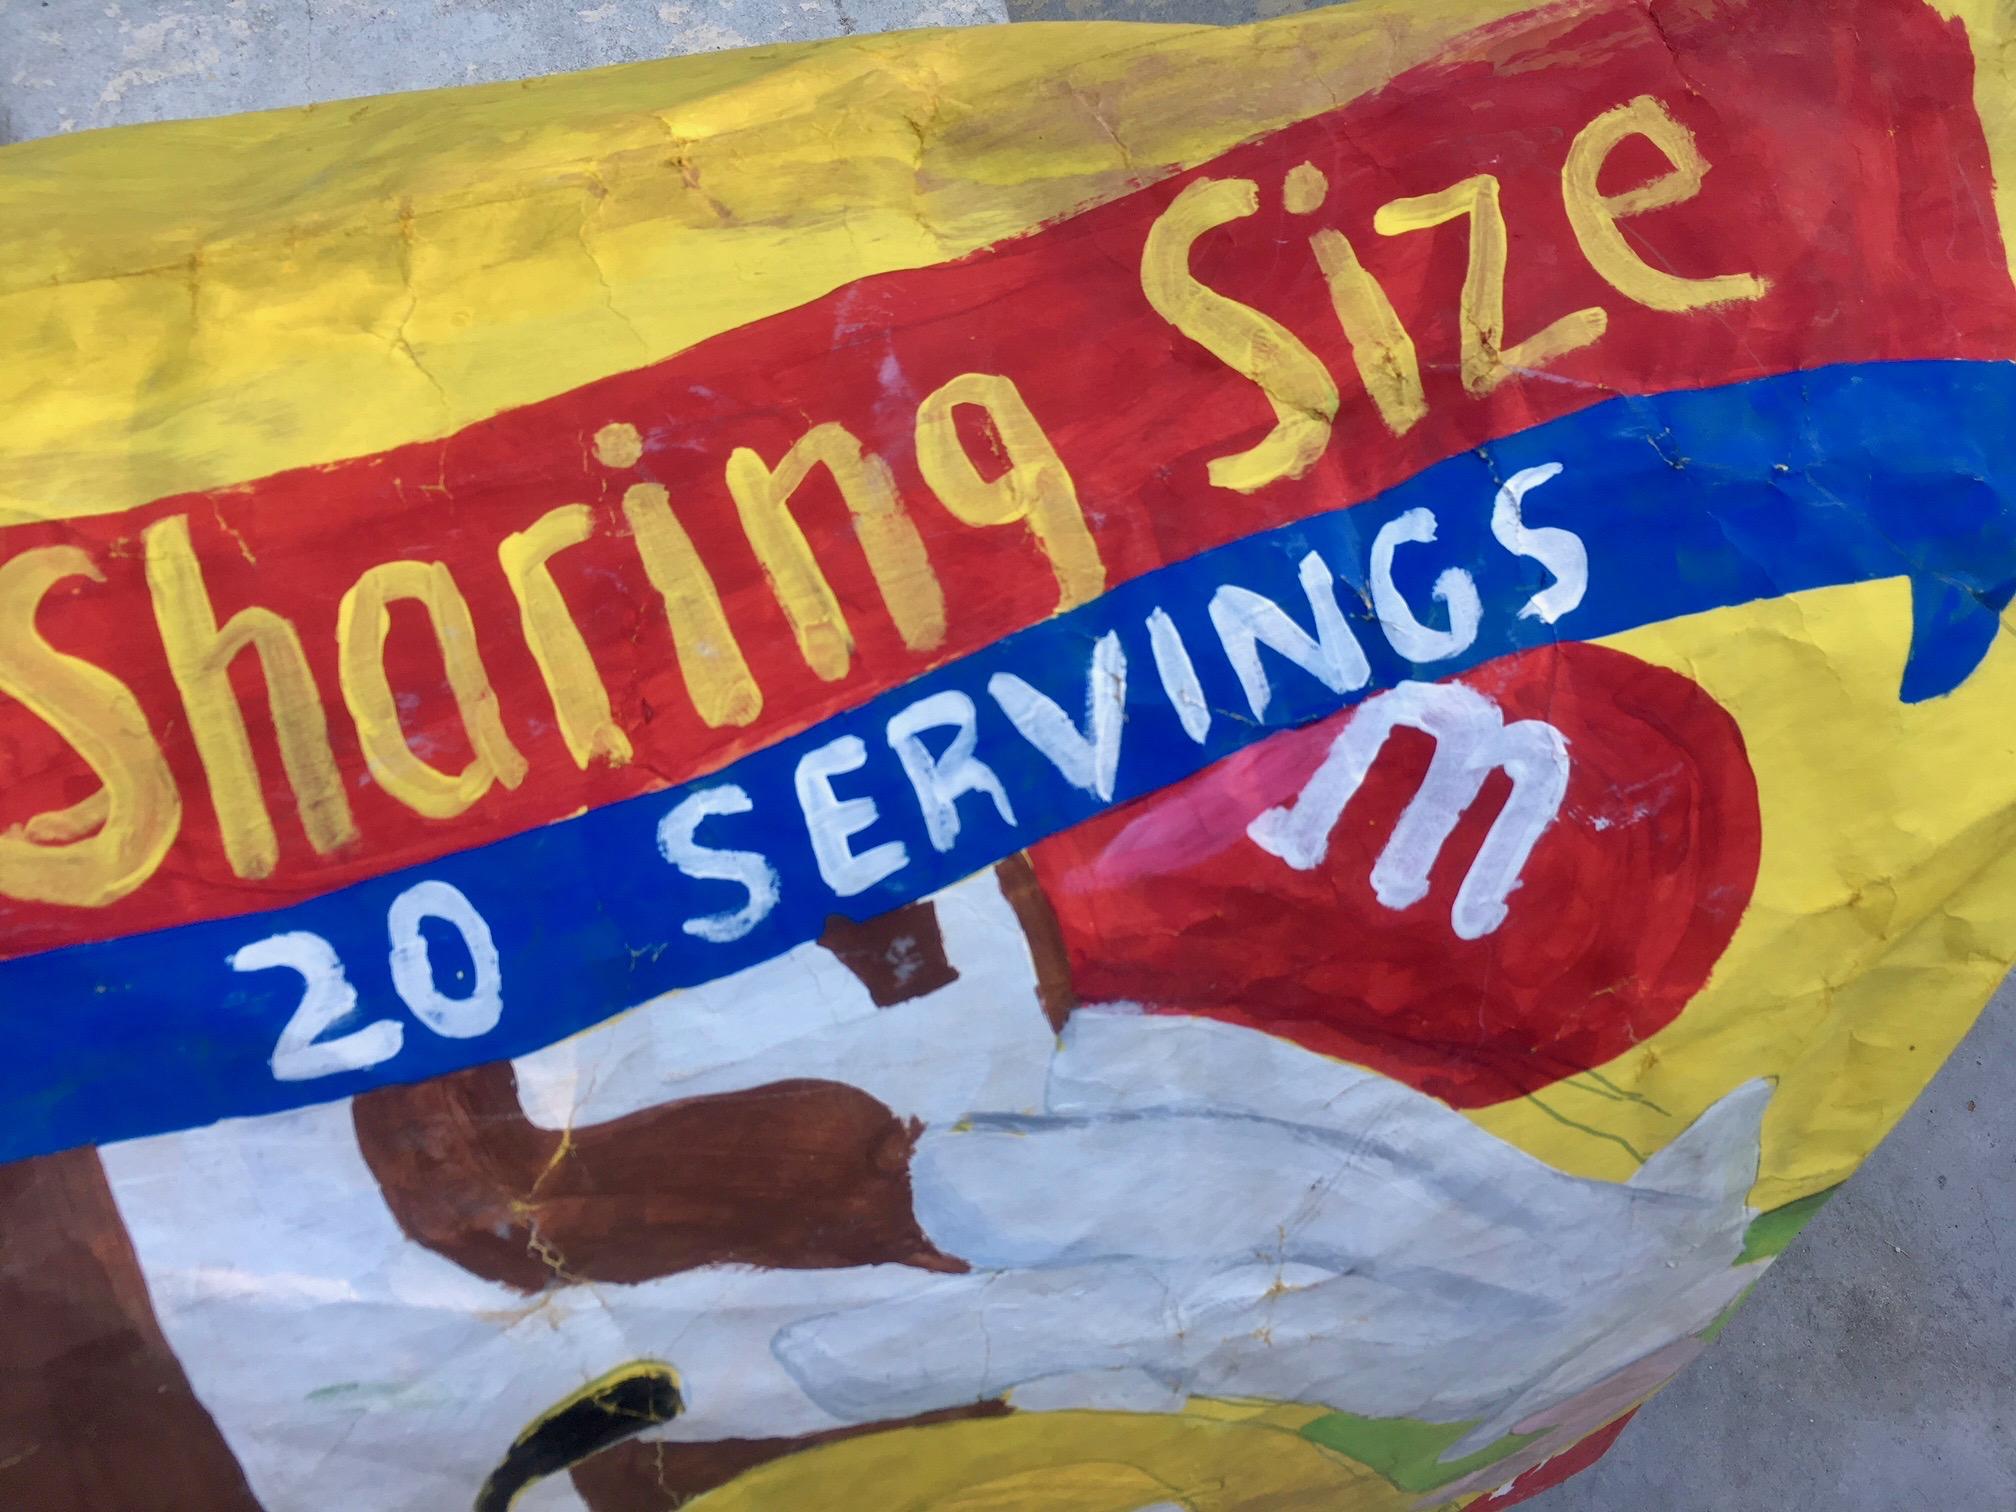 North American 5 Foot Long Hand-Painted Peanut M&Ms Pop Art Bag For Sale